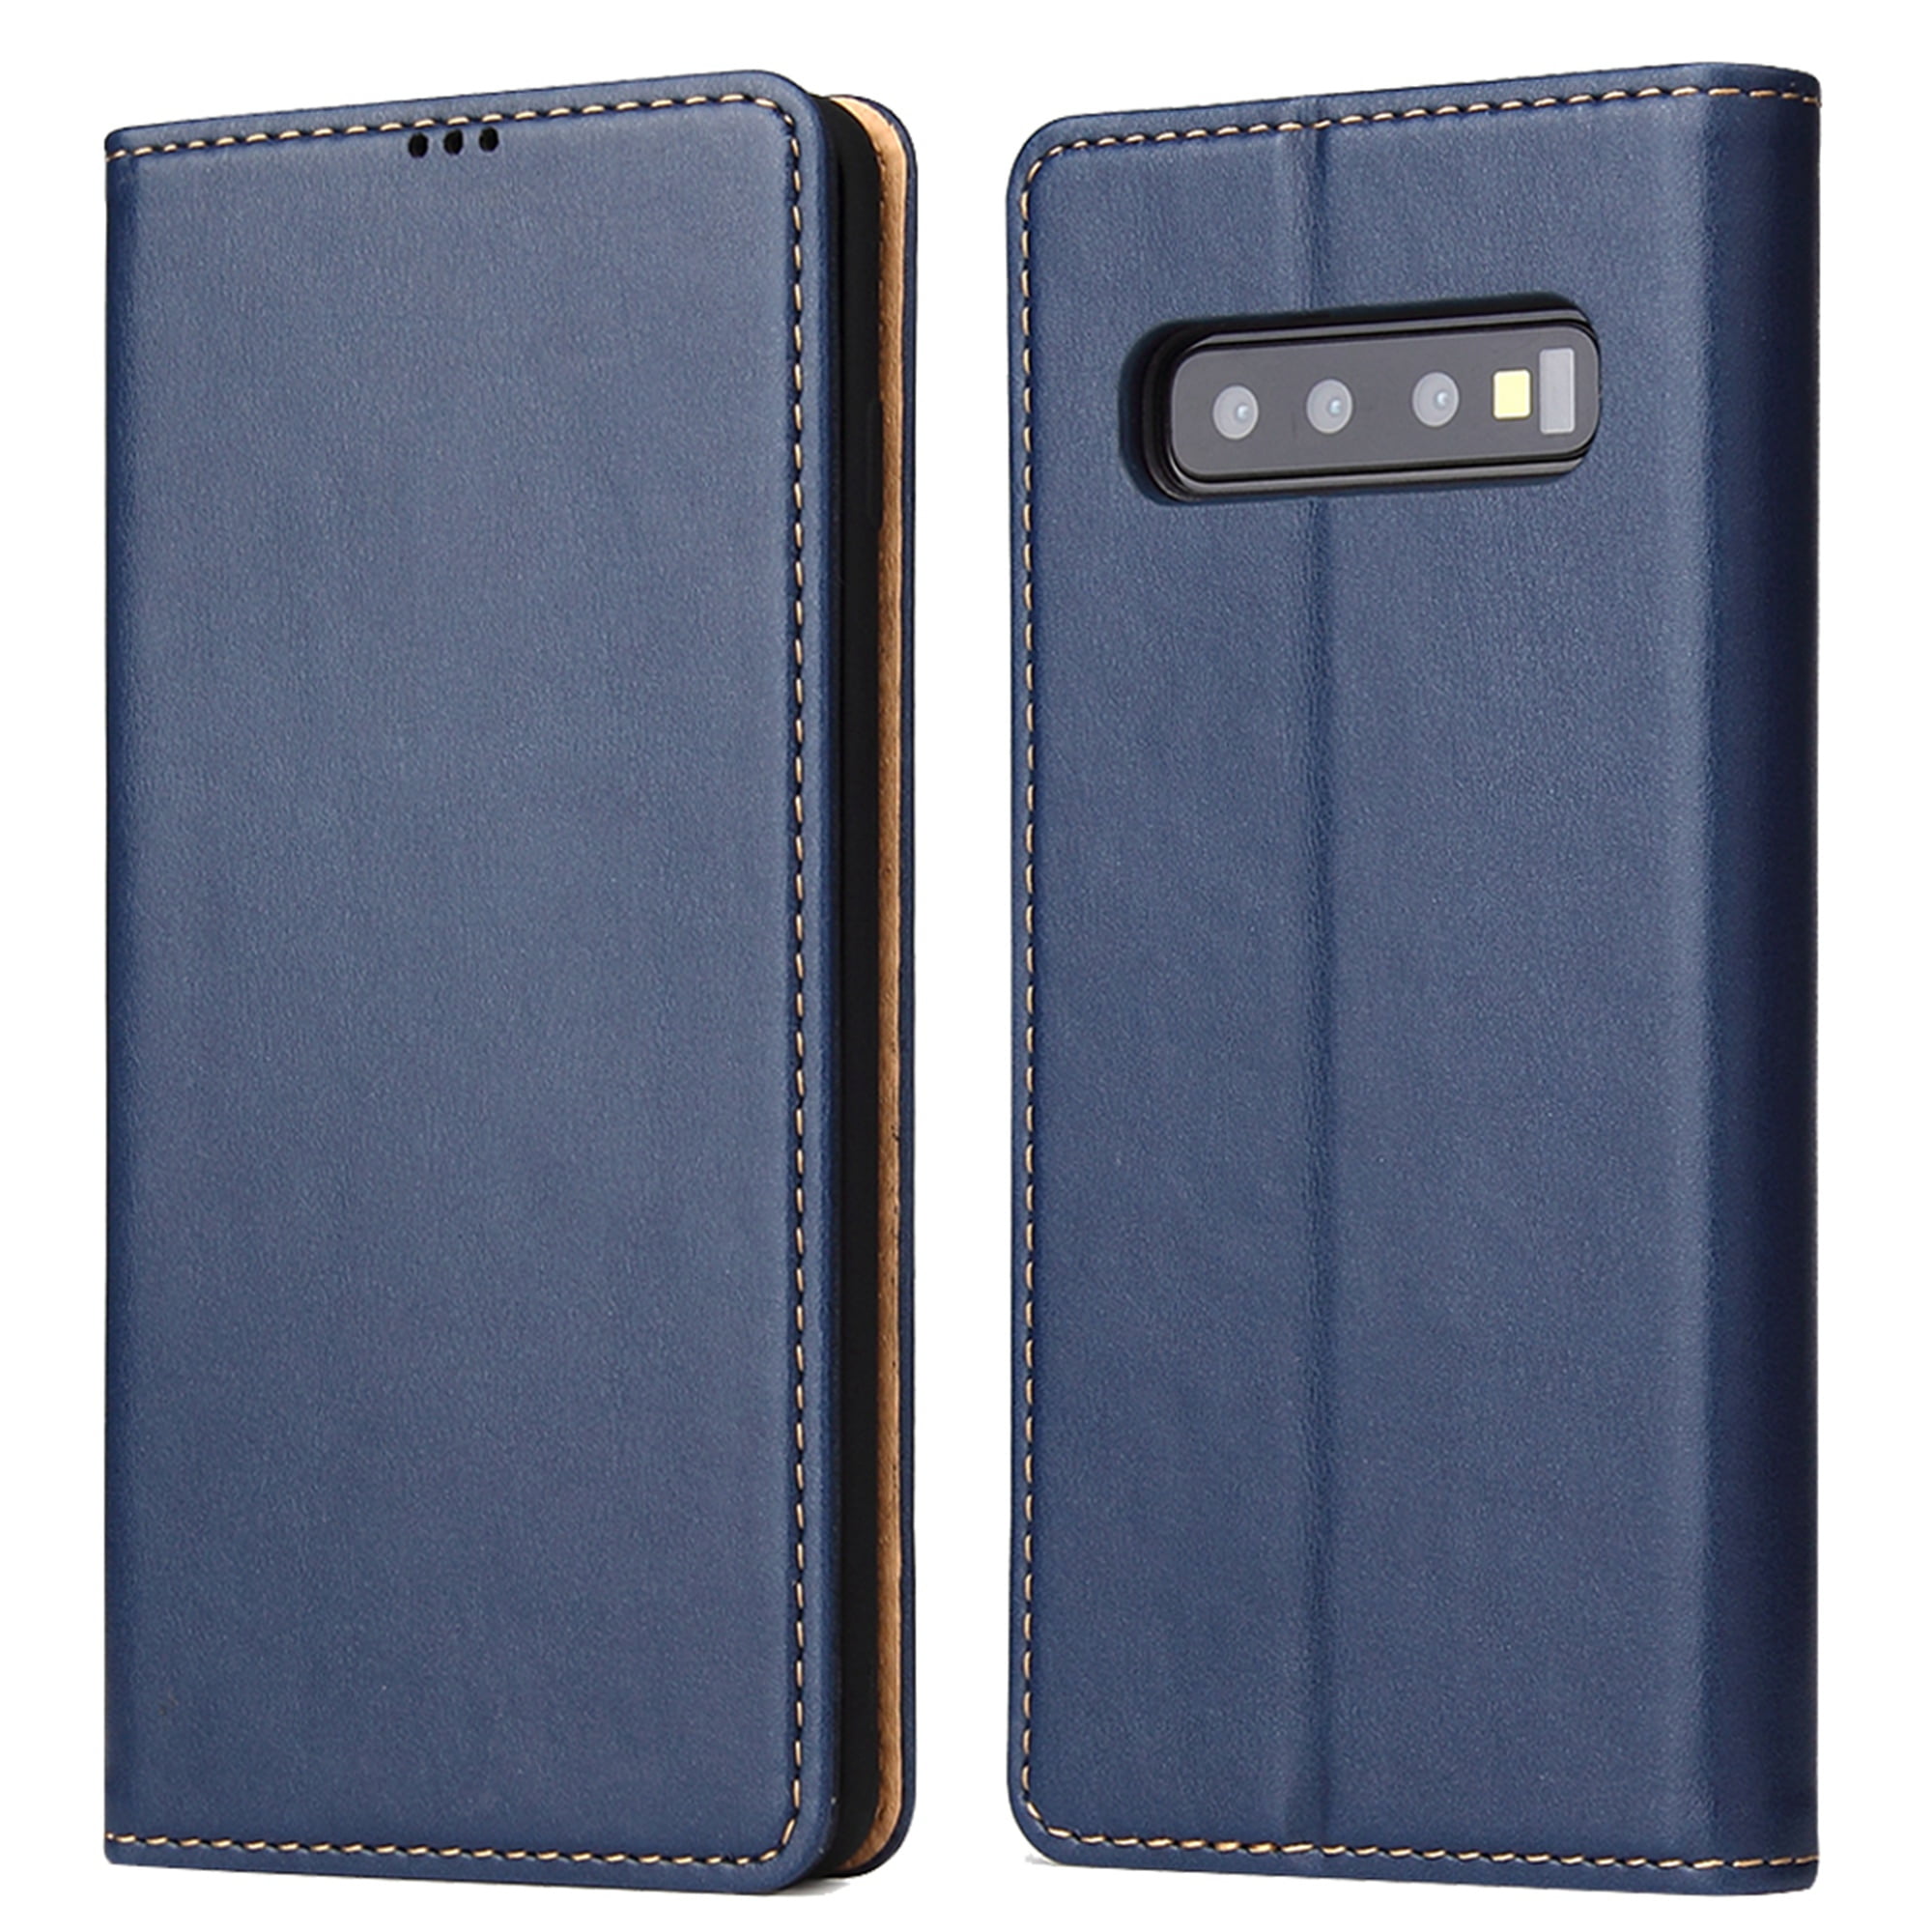 Samsung Galaxy S10 Wallet Case Detachable Black 2 in 1 Samsung S10 Folio Flip Case with Gift Box Package S10 Wrist Strap AMOVO Case for Galaxy S10 6.1 Kickstand 6.1 Vegan Leather 